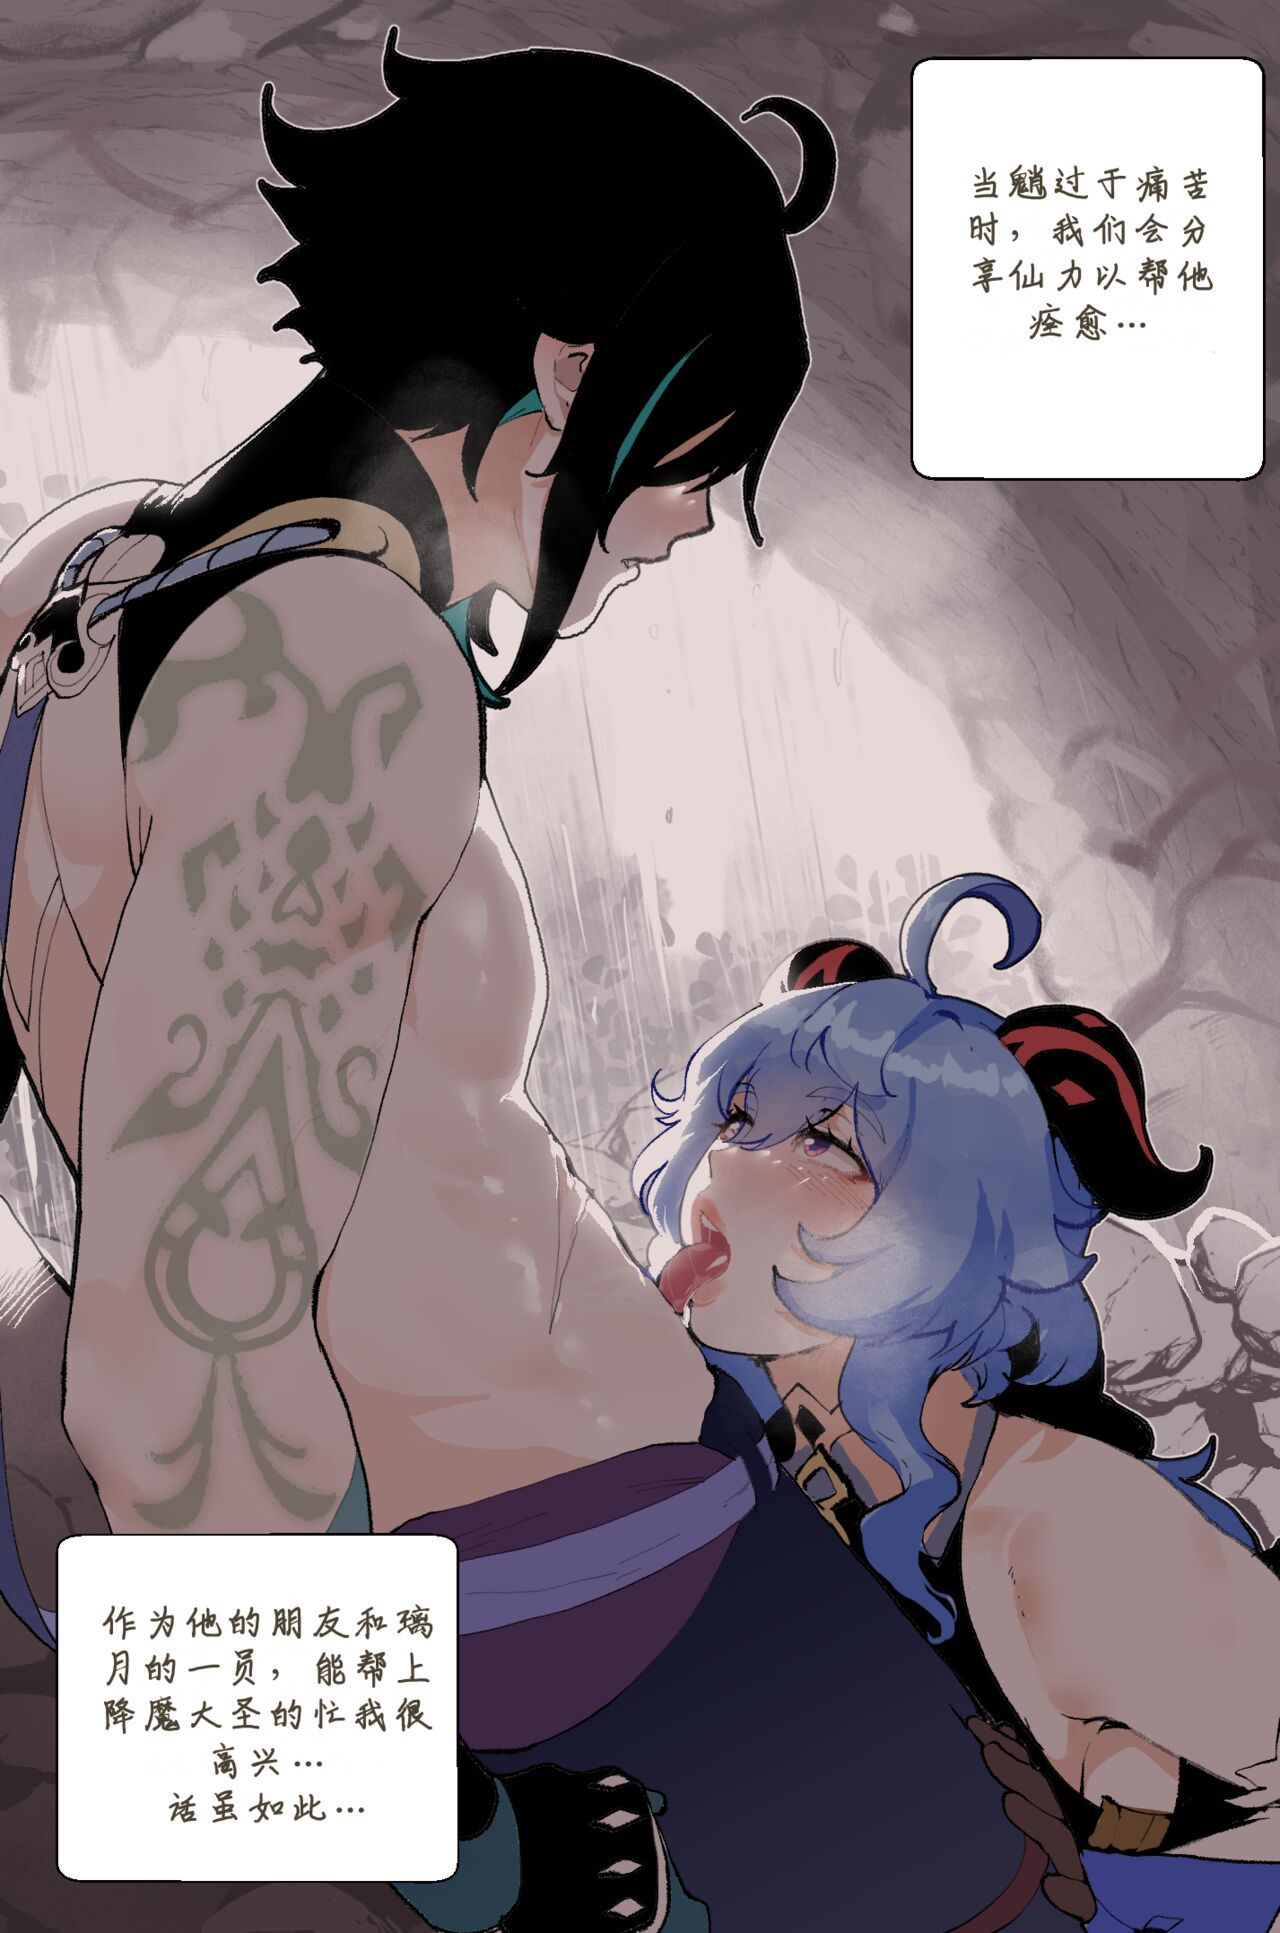 ThiccWithaQ [Chinese] [Ongoing] ThiccWithaQ 【Neko汉化】 65